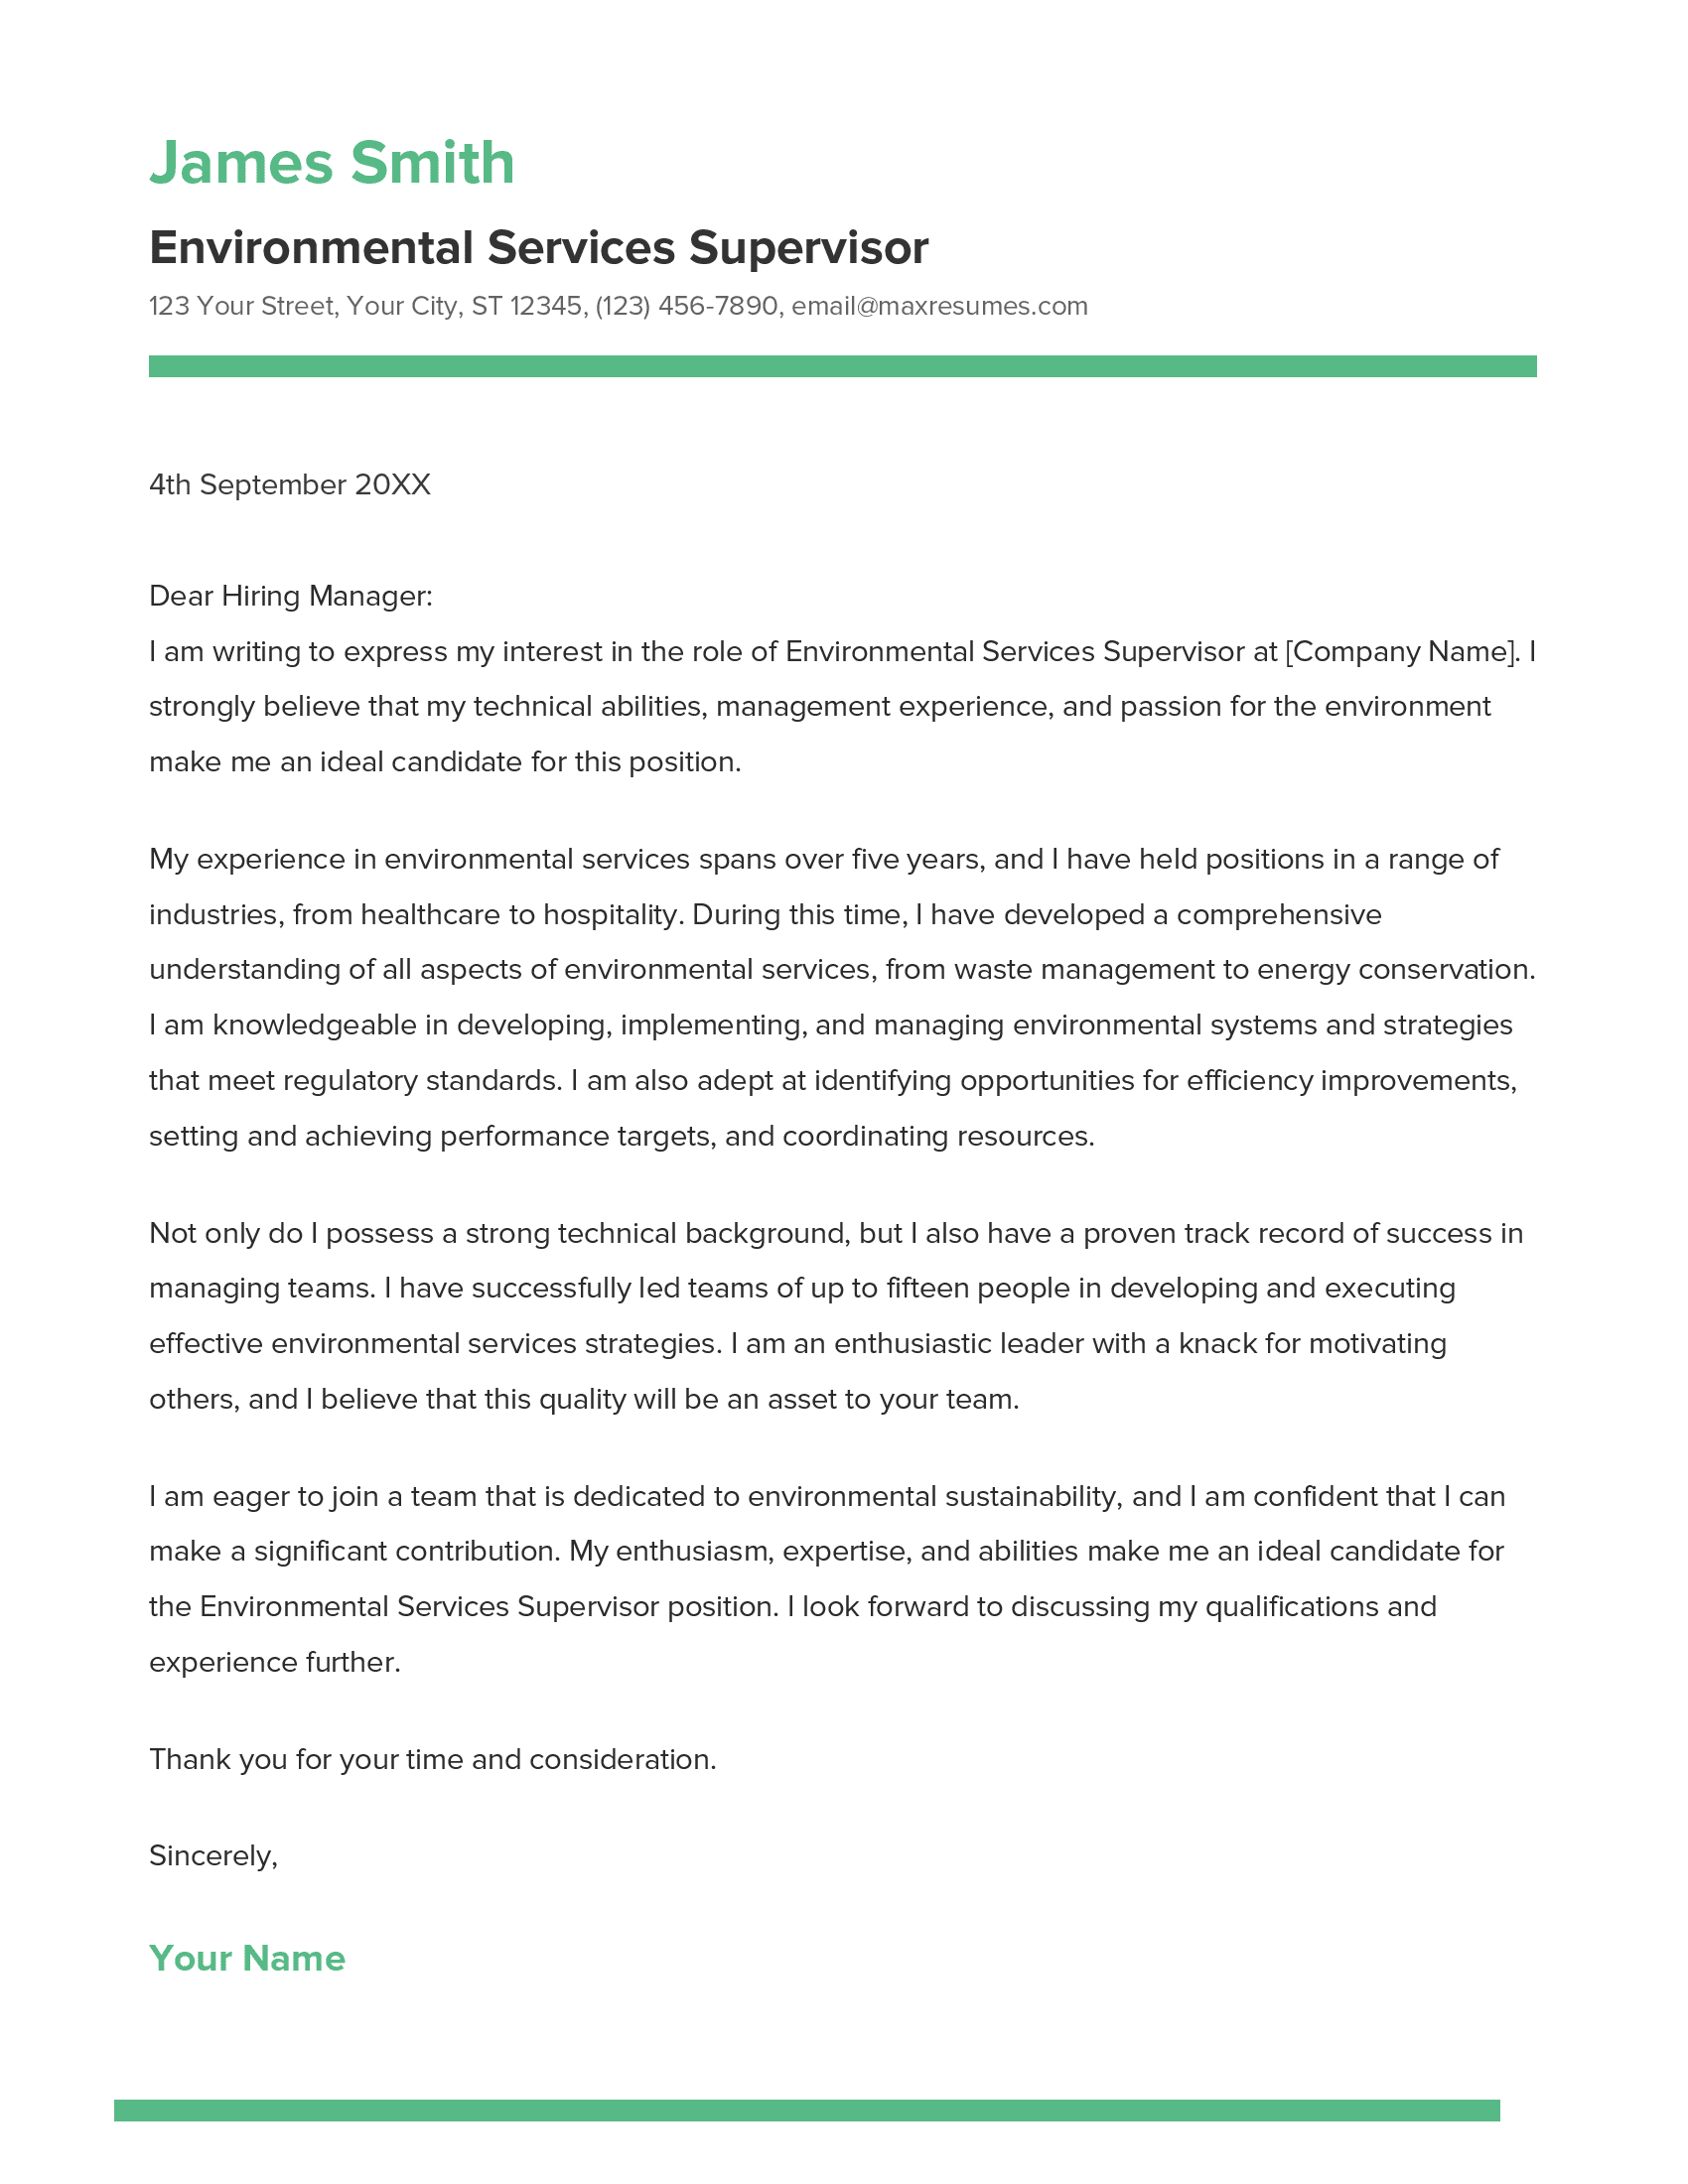 Environmental Services Supervisor Cover Letter Example